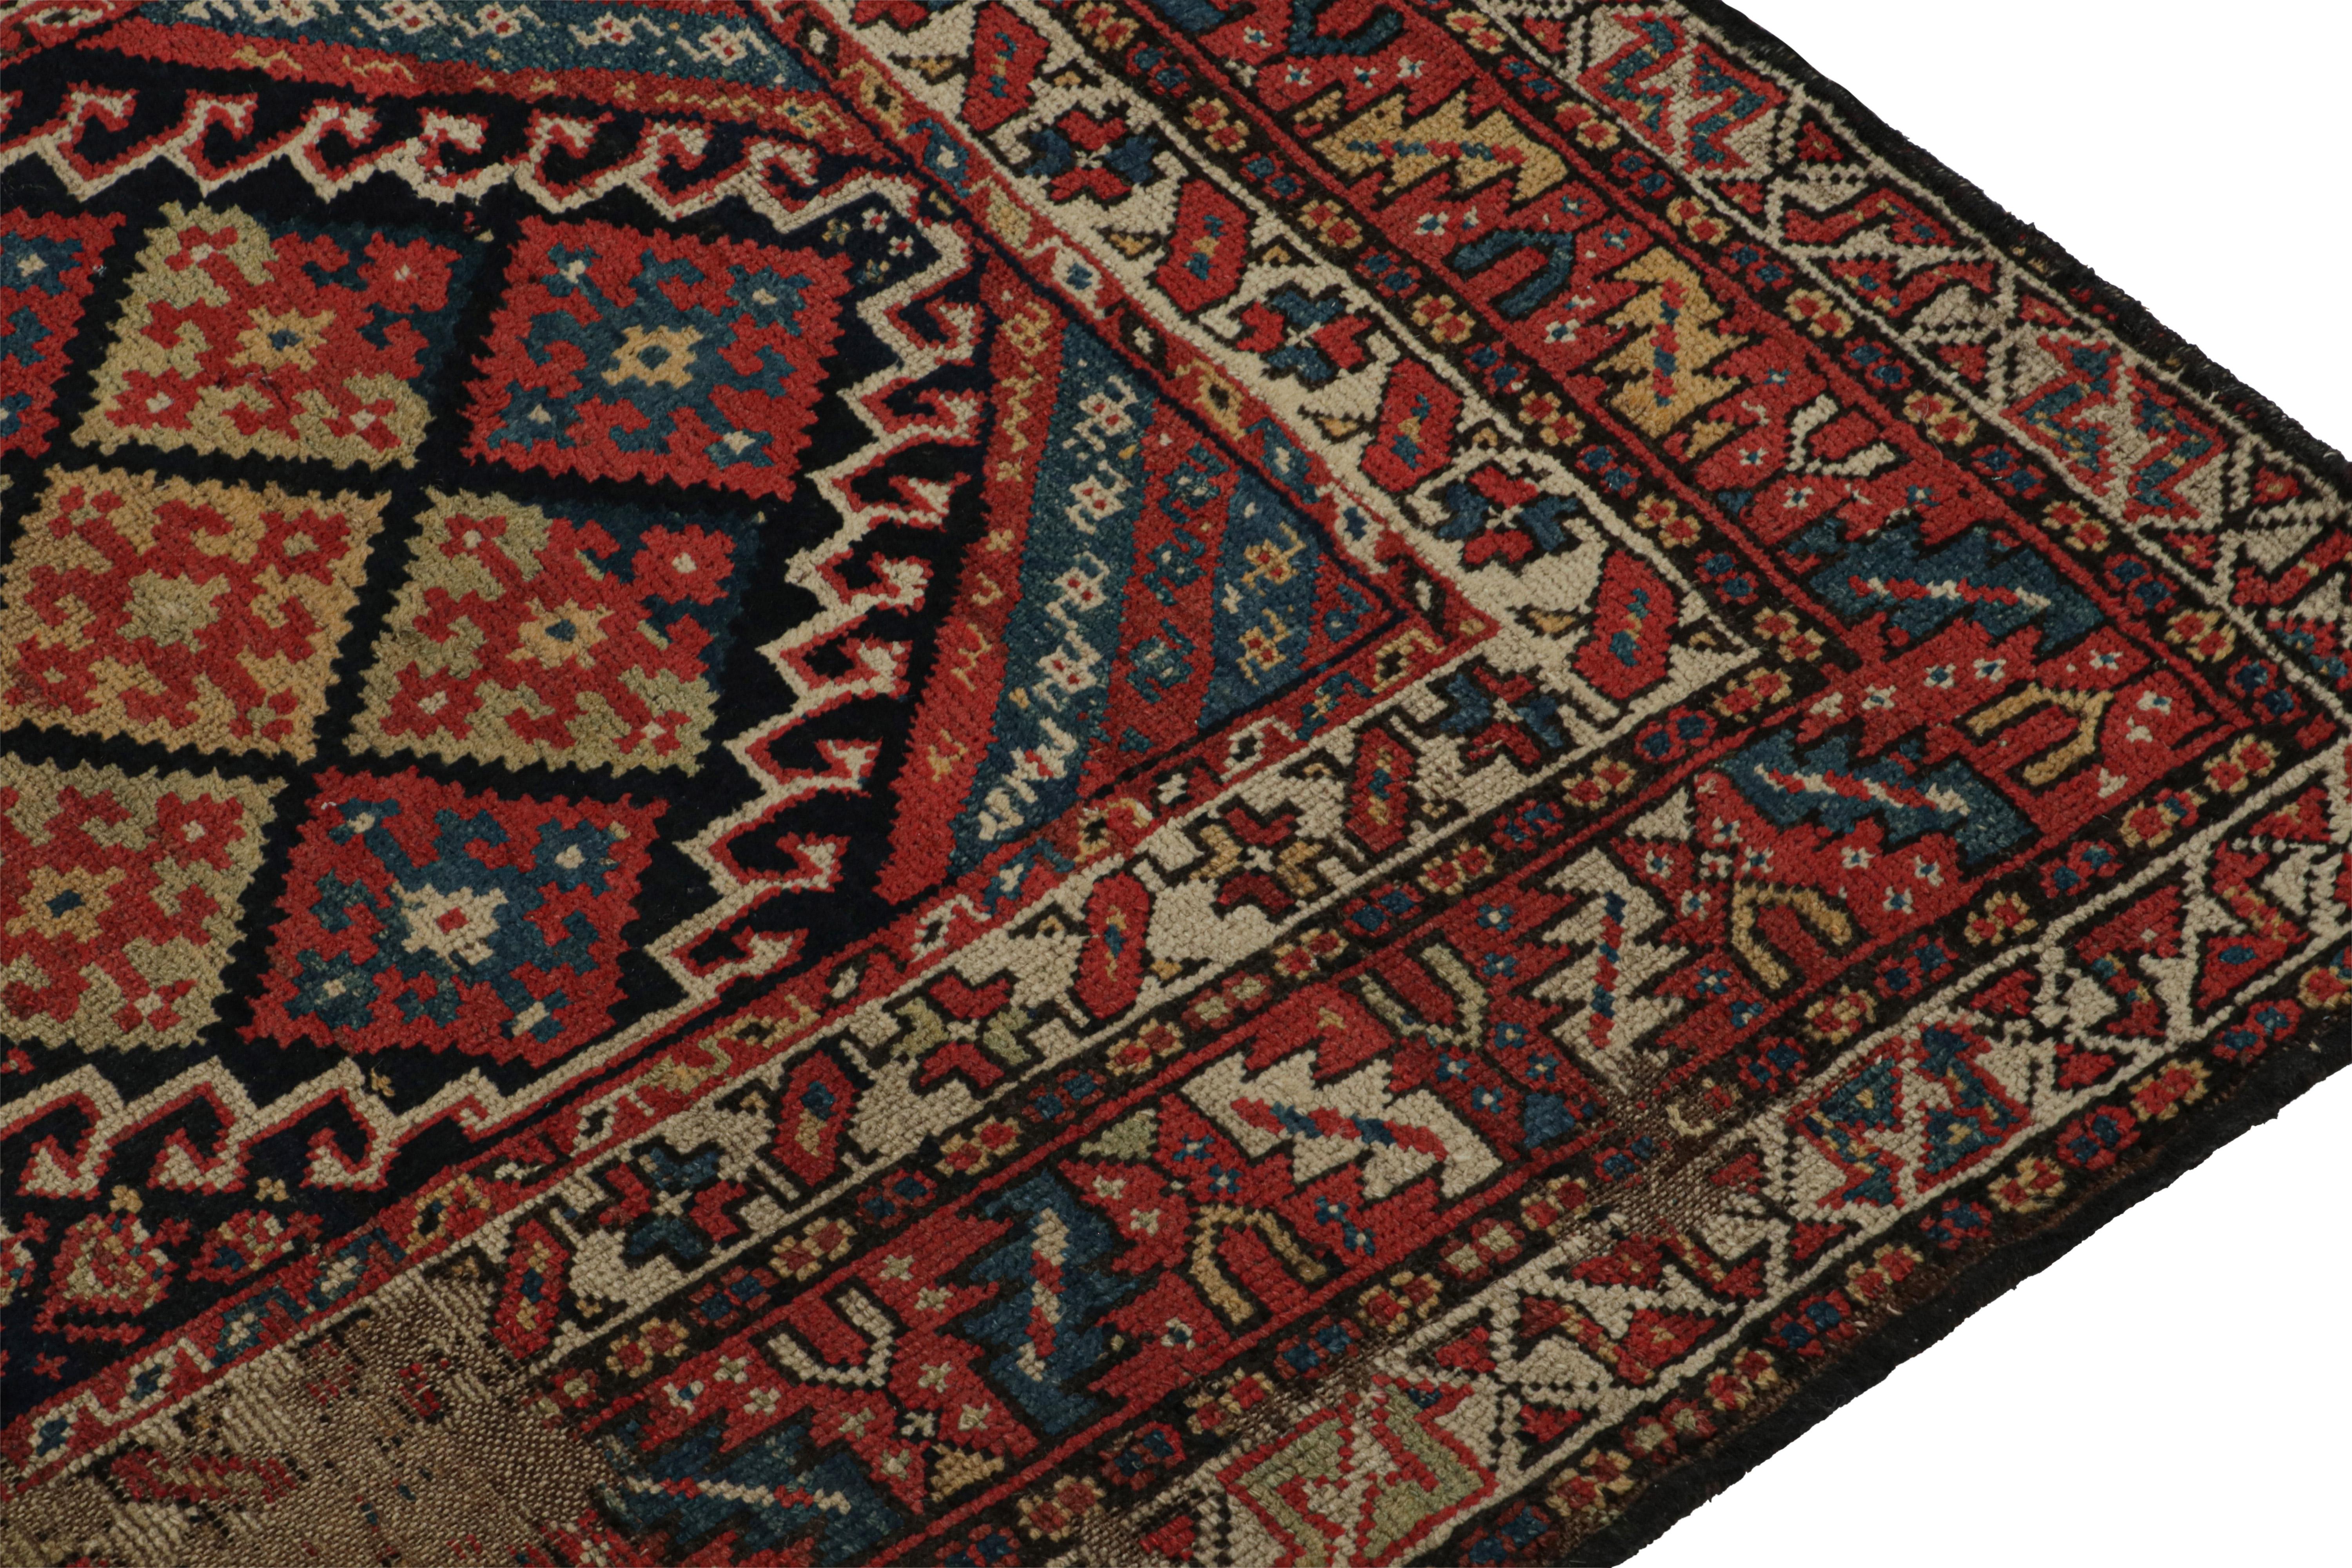 Hand-Knotted Antique Caucasian Rug in Beige, Blue & Red Geometric Patterns, from Rug & Kilim